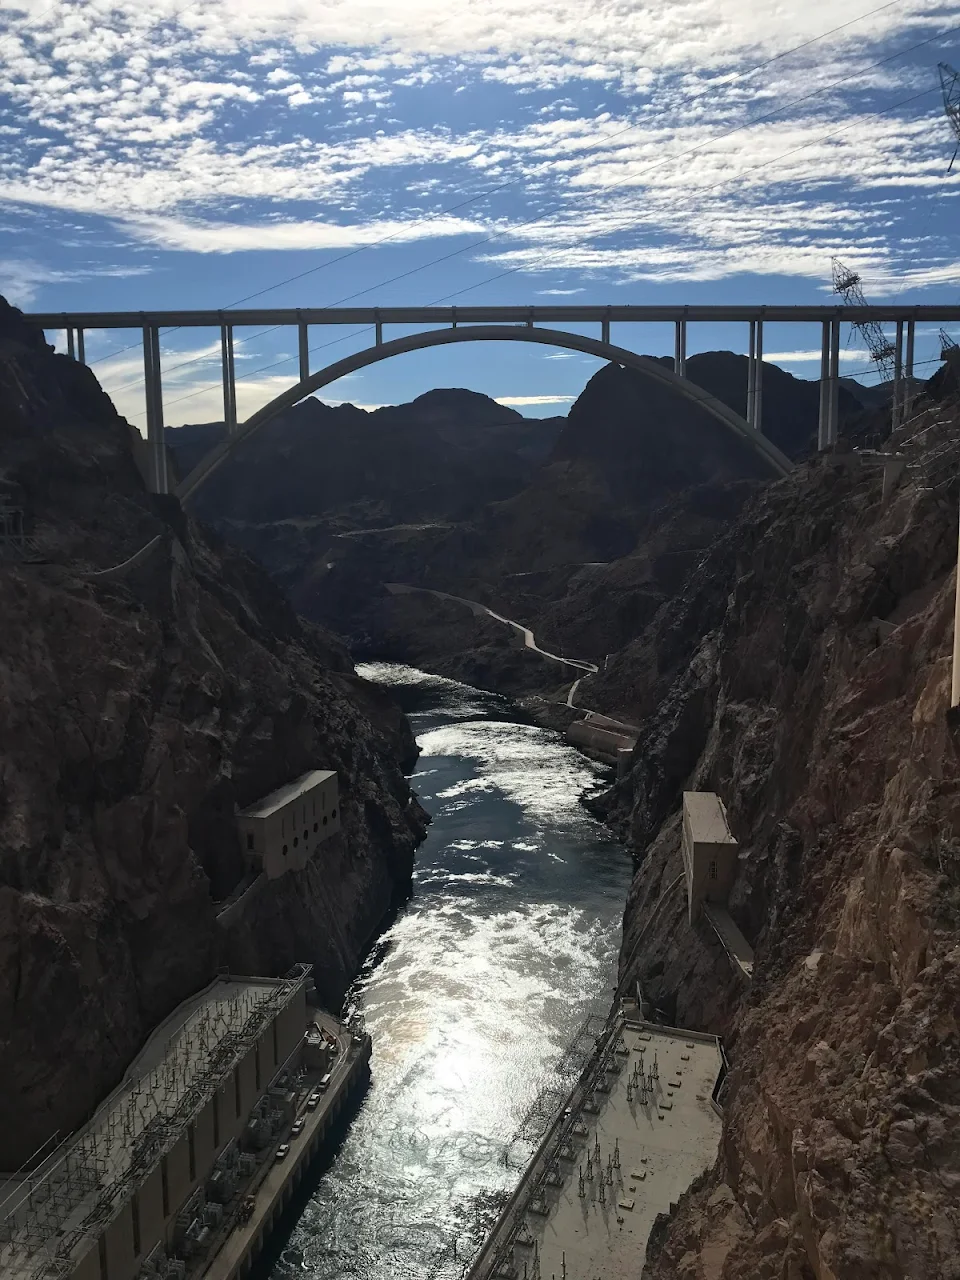 another pic from the Hoover dam in 2018